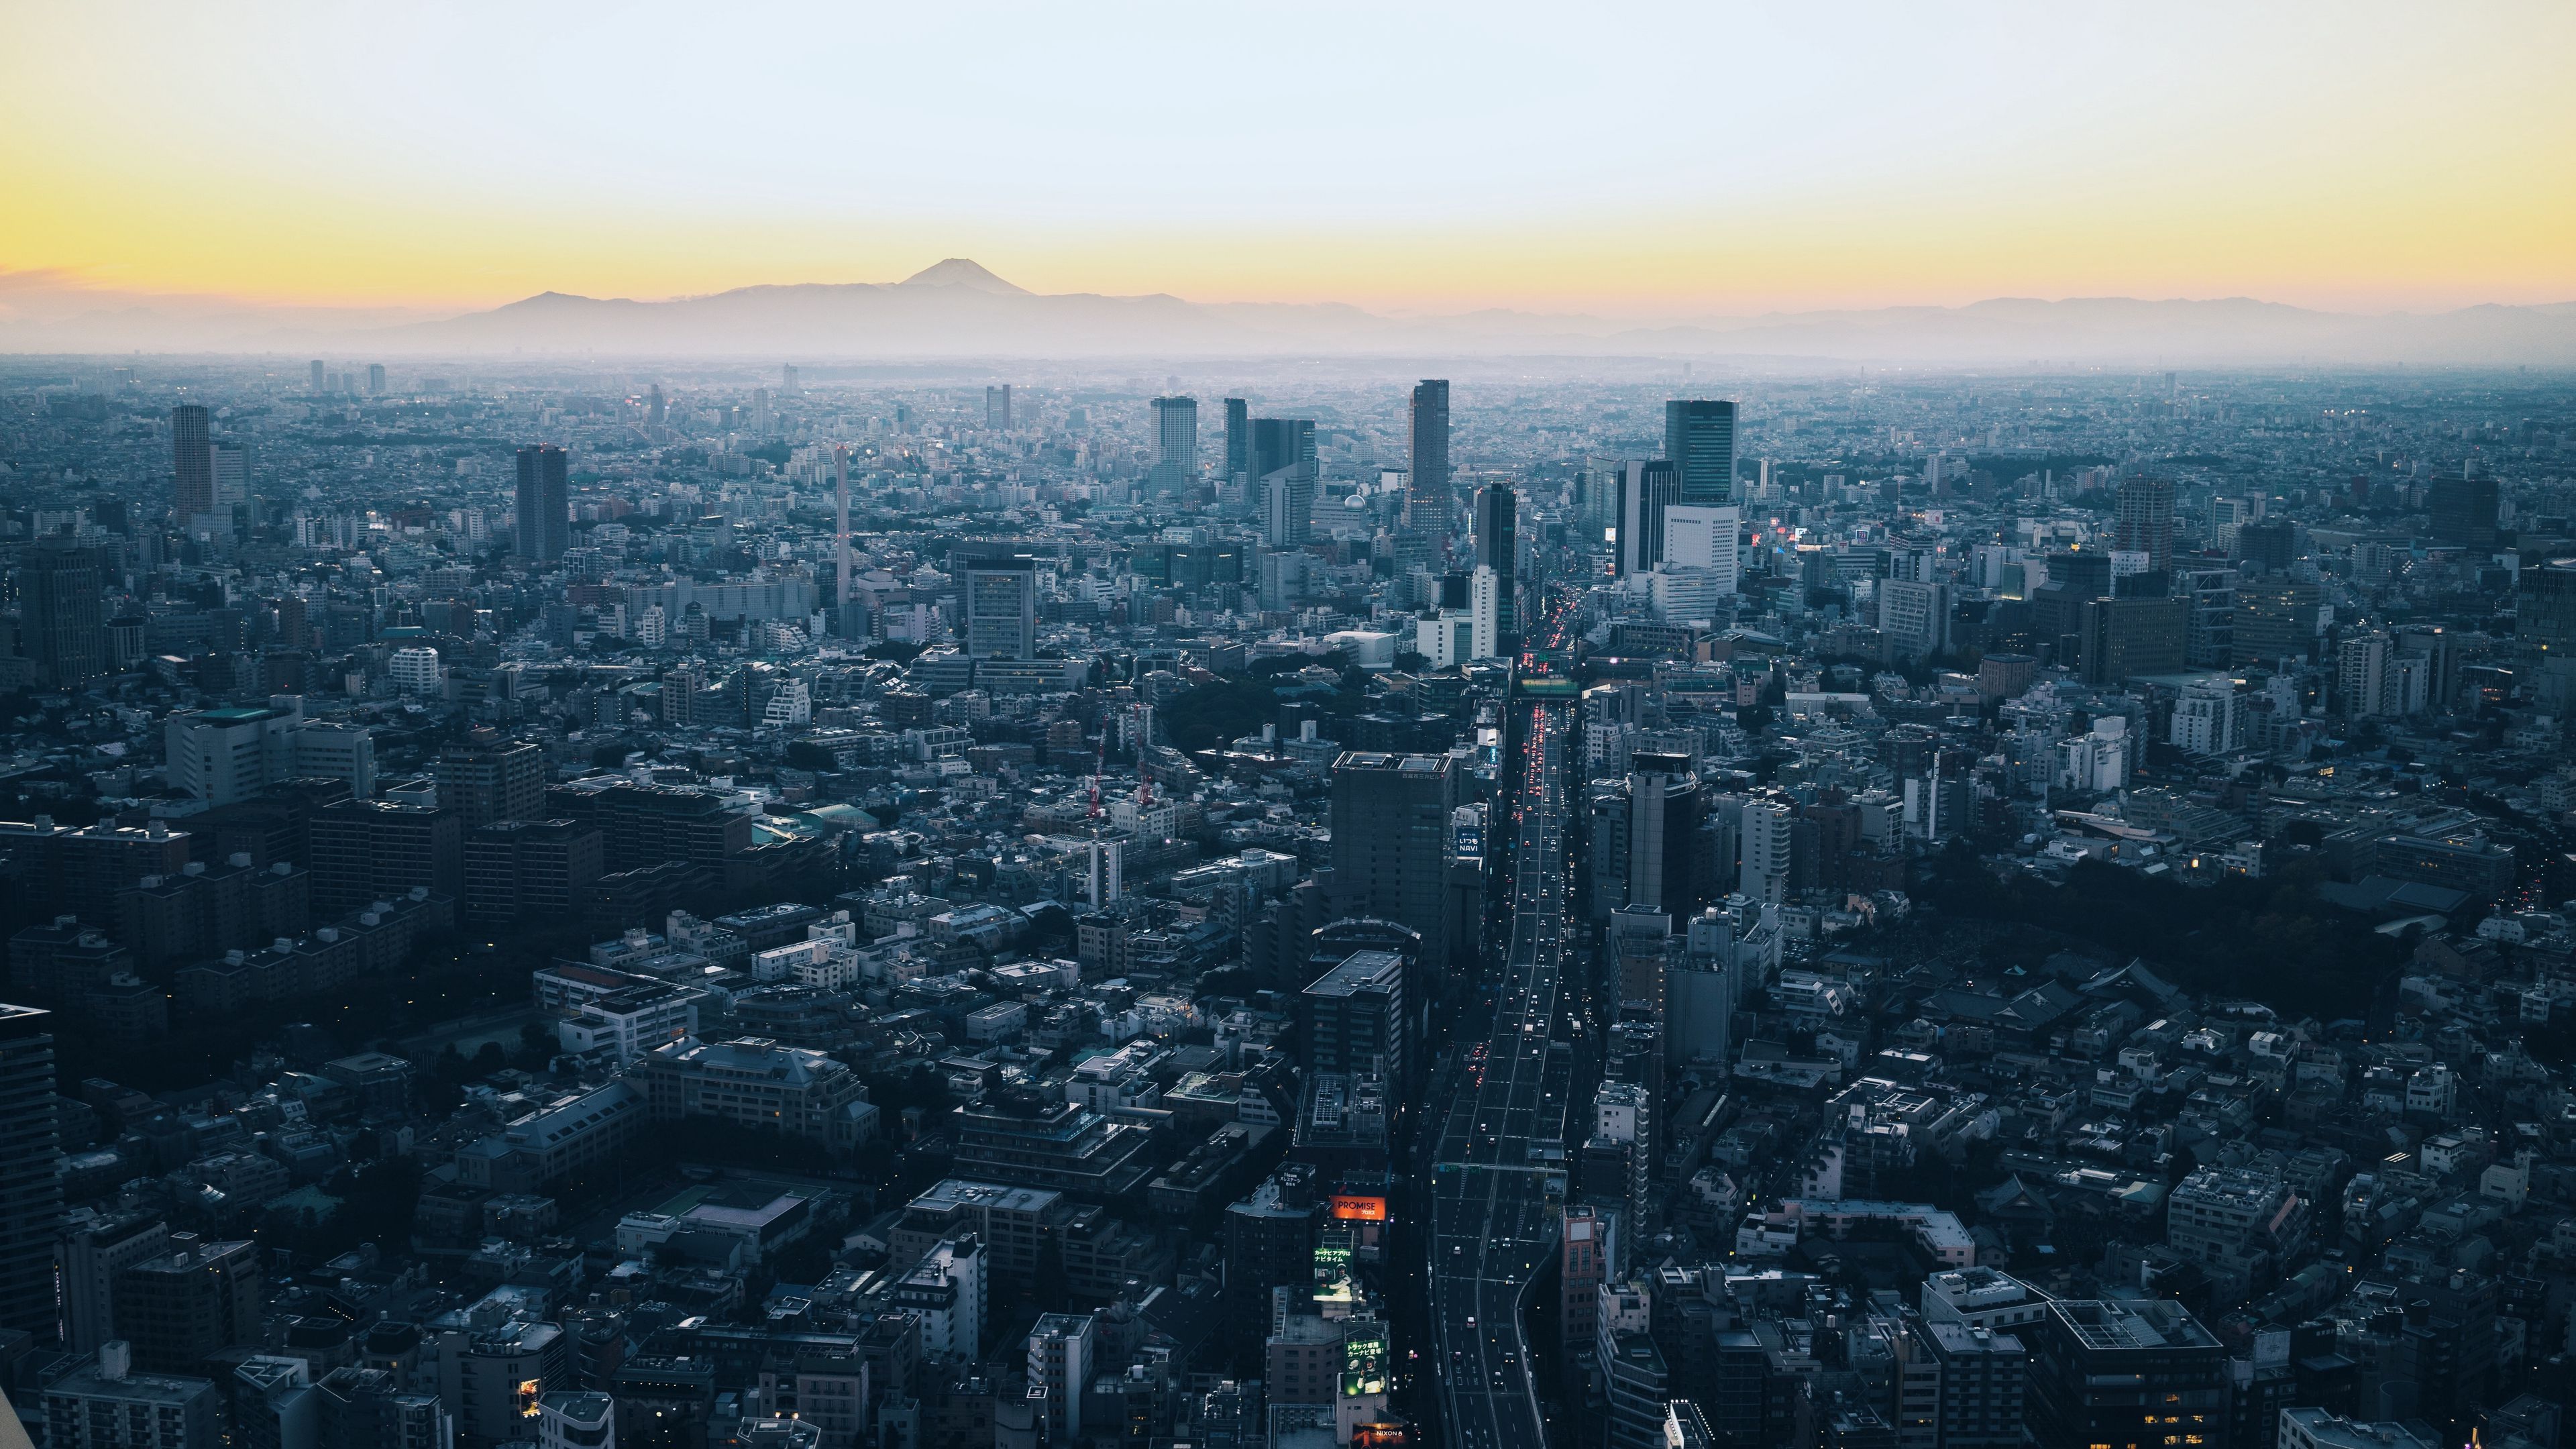 Download wallpaper 3840x2160 minato, japan, skyscrapers, city, view from above 4k uhd 16:9 HD background